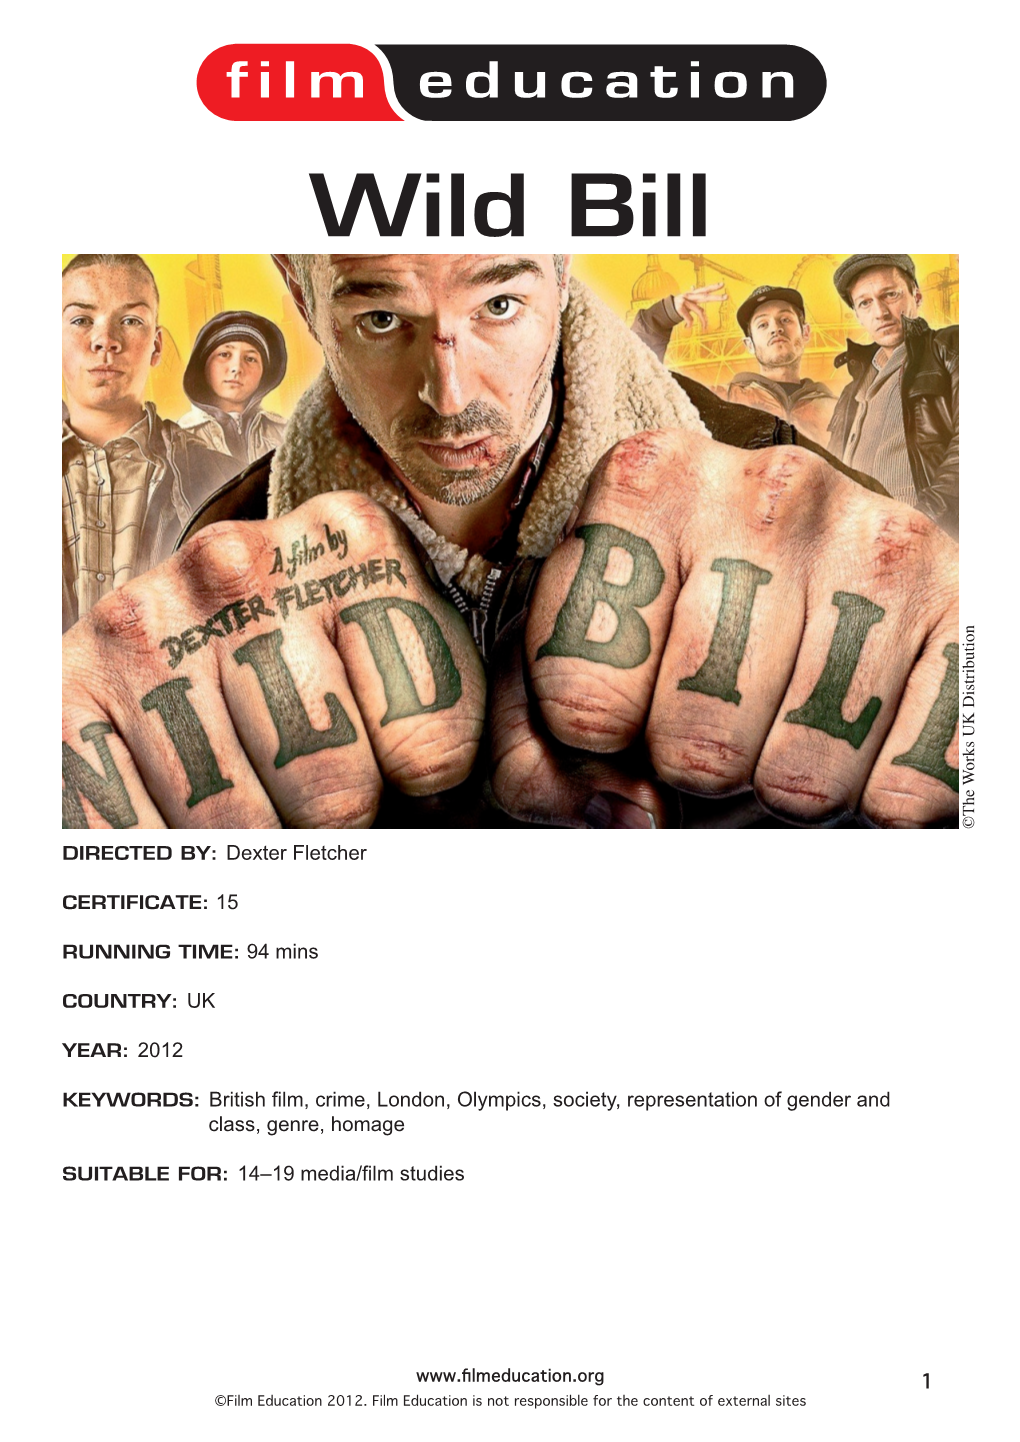 Wild Bill ©The Works UK Distribution Works ©The Directed By: Dexter Fletcher